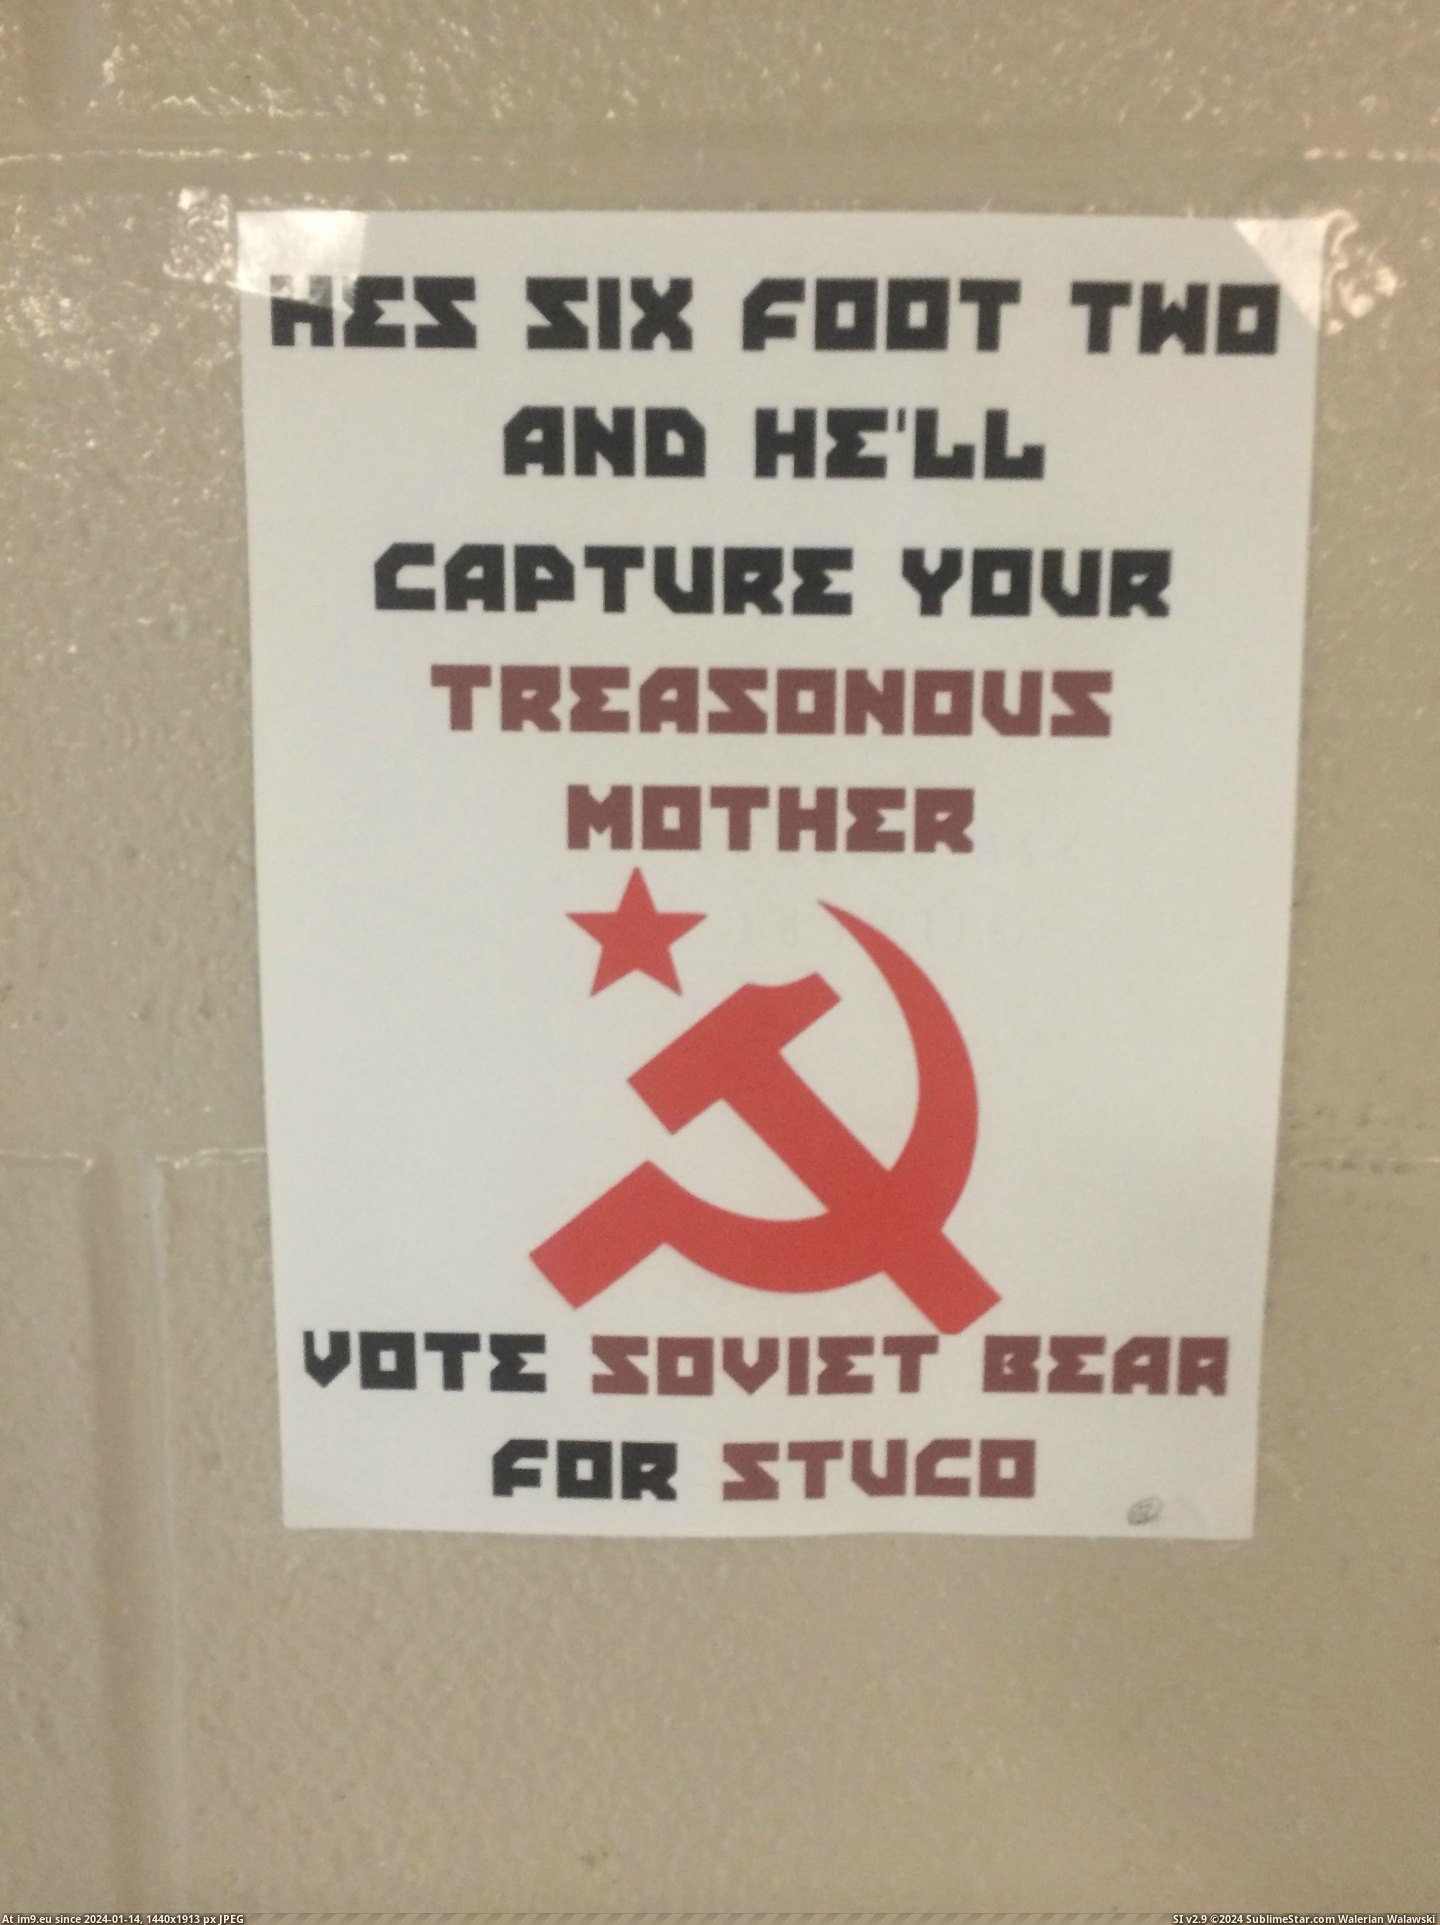 #Funny #School #Decided #Holding #Soviet #Council #Elections #Bear #Student #Run [Funny] So my school is holding elections for student council... and someone has decided to run as Soviet Bear 7 Pic. (Изображение из альбом My r/FUNNY favs))